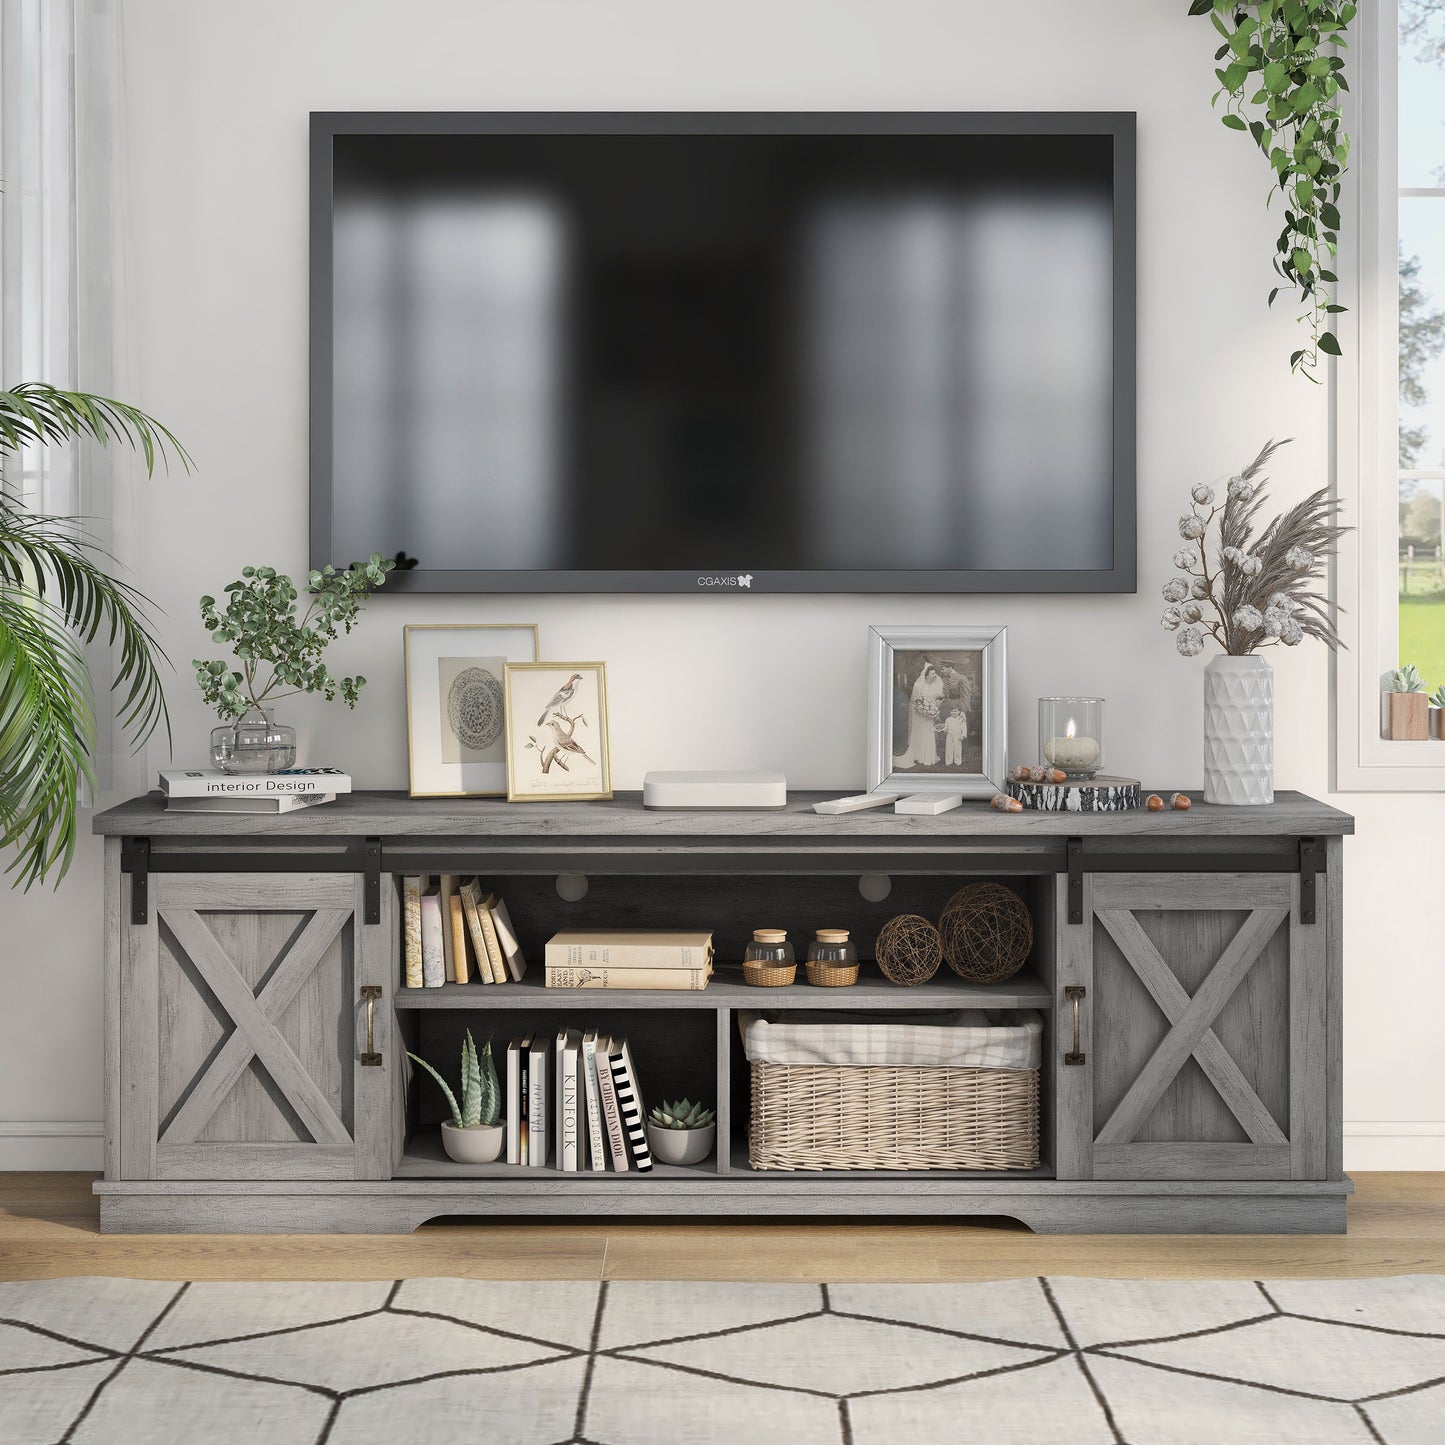 Front facing stand only from a three-piece rustic vintage gray oak TV stand and pier entertainment set in a living room with accessories